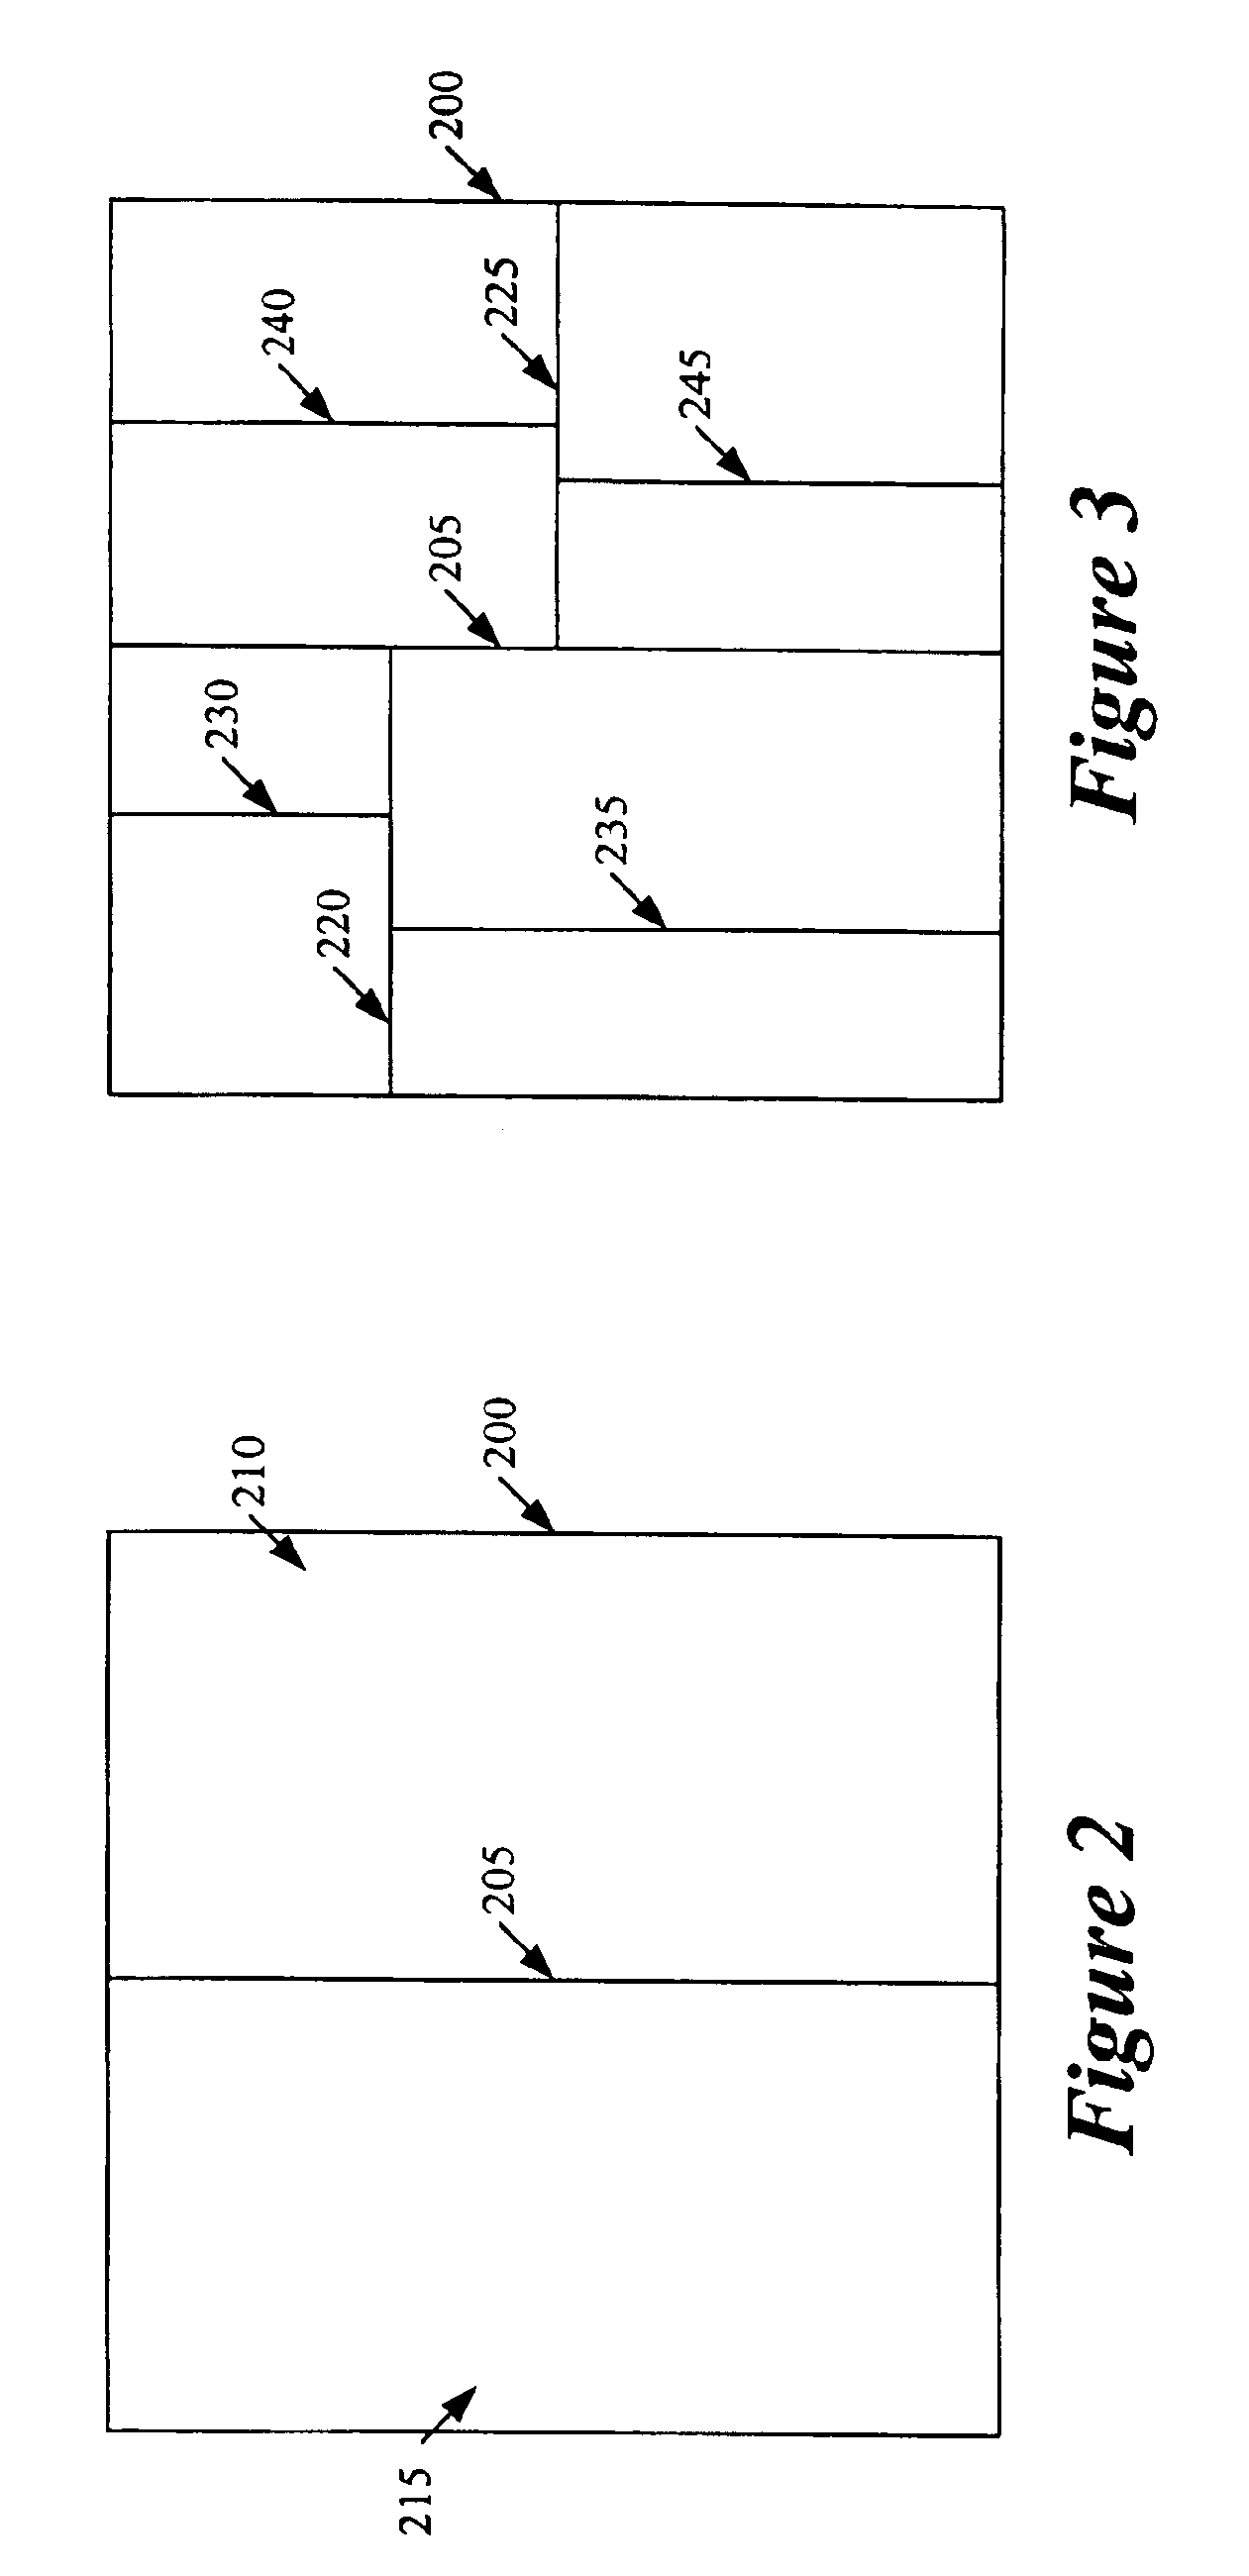 Method and apparatus for pre-computing and using multiple placement cost attributes to quantify the quality of a placement configuration within a partitioned region